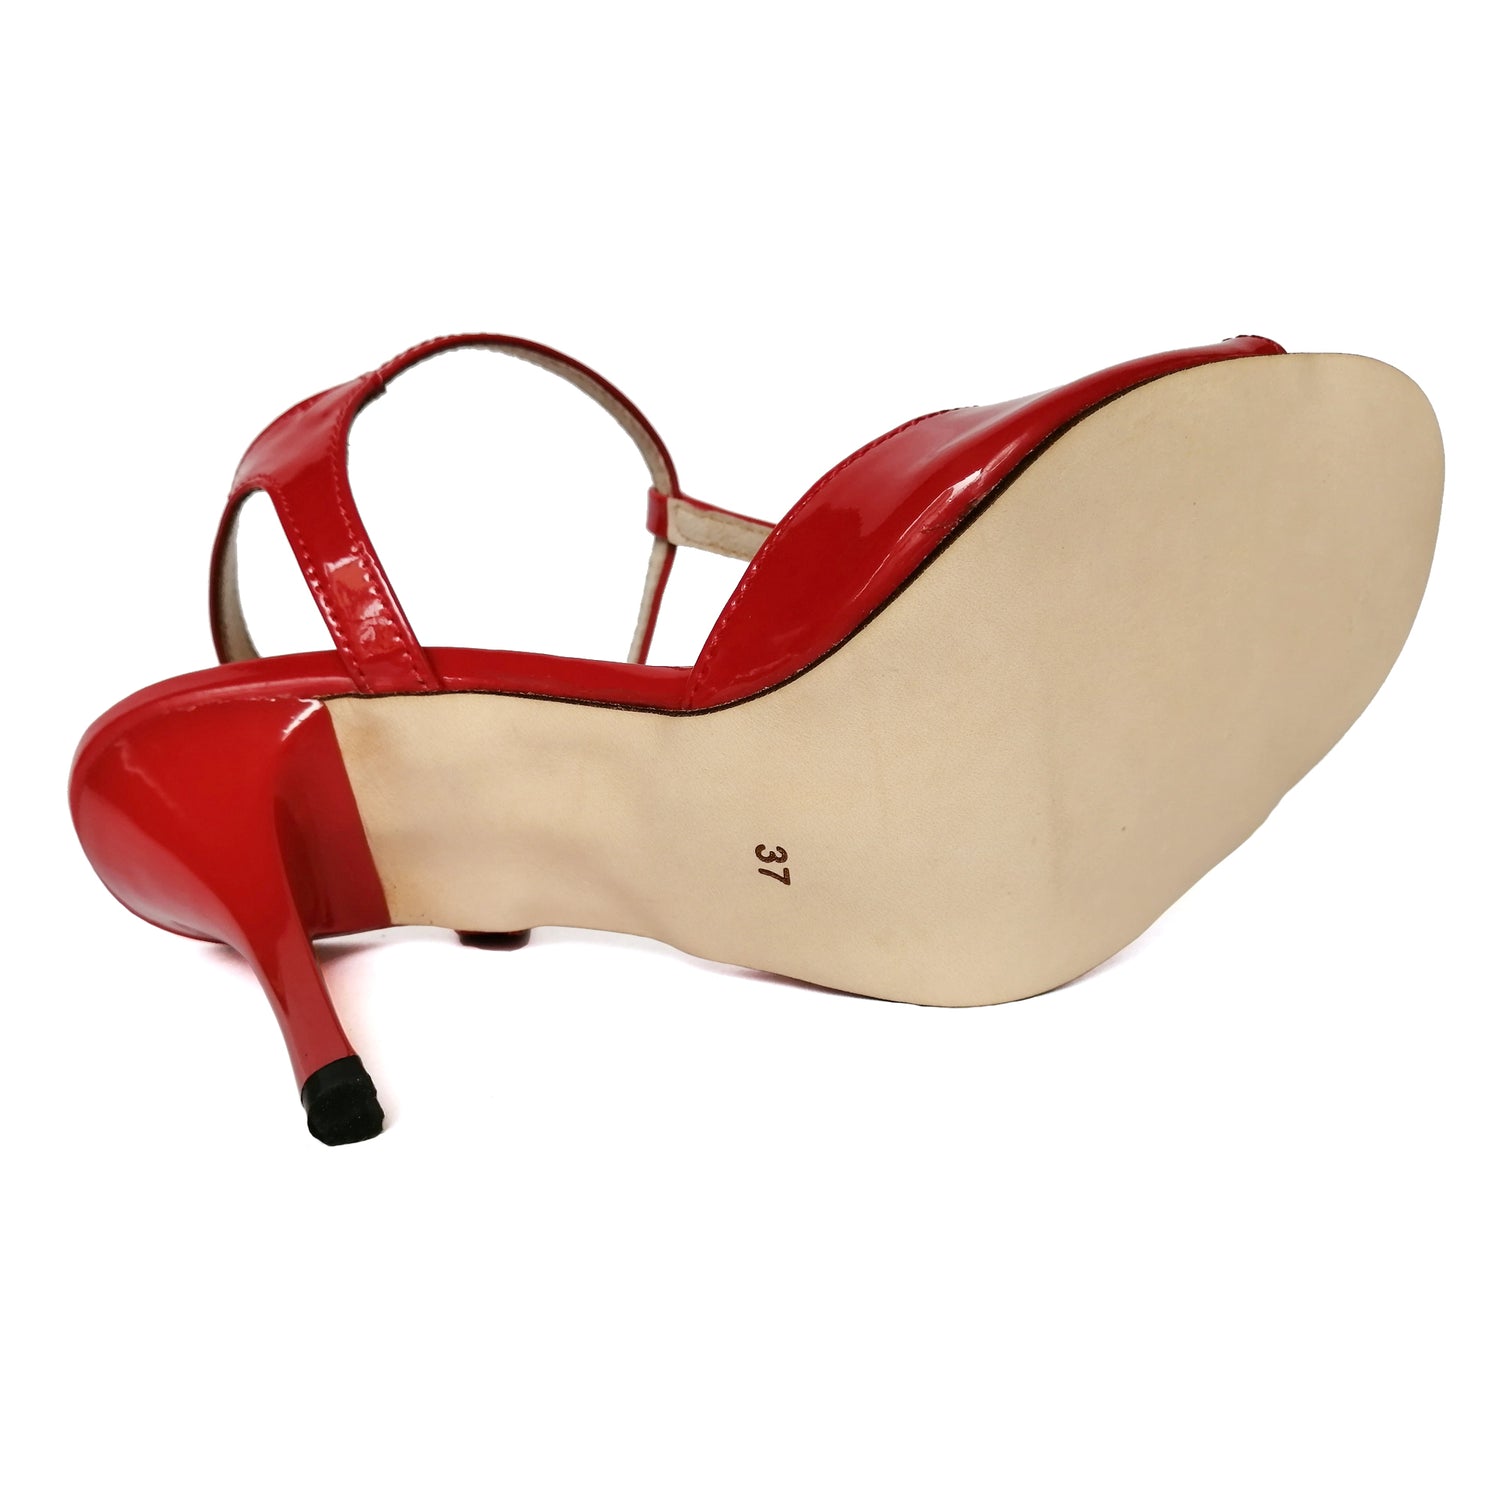 Pro Dancer red leather high heels for Argentine Tango4